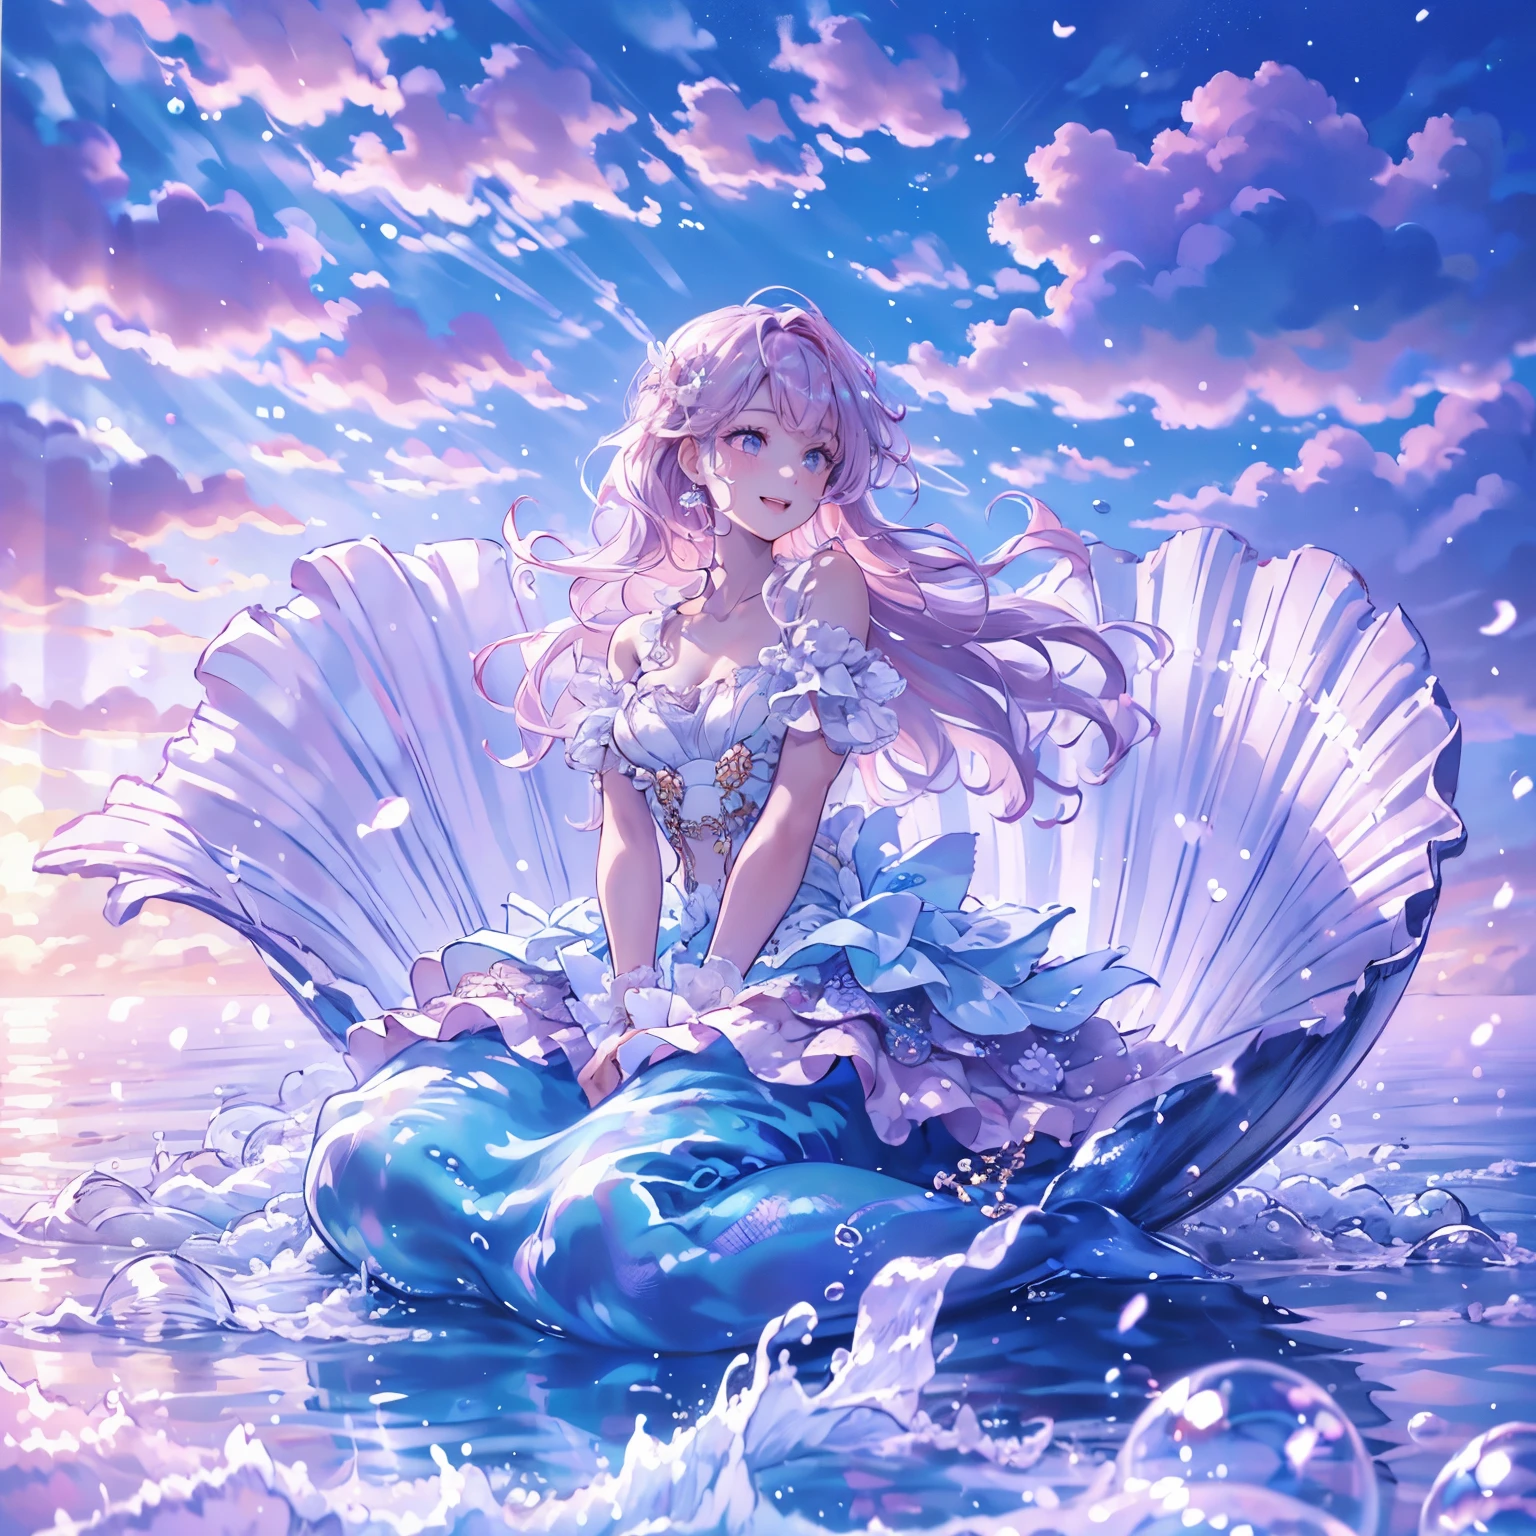 (exquisite, beautiful, very detailed, masterpiece, high quality, disorganized, High resolution, Full HD, 16k), (woman,mermaid),(sitting on a large white seashell),((Happy, fun, smile, laughter:1.3)), (bob, wavy hair, pink hair), ((bare hands:1.5)),purple eyes, ((sing a song:1.5)),Big eyes, Fair skin, slim,( soft edge, soft lines), wide shot, (highly saturated colors, Bright colors, pastel colour), (under the beautiful sea, in the sea), dramatic lighting, warm lighting, soft lighting, fantasy, romantic atmosphere, dreamy atmosphere, floating